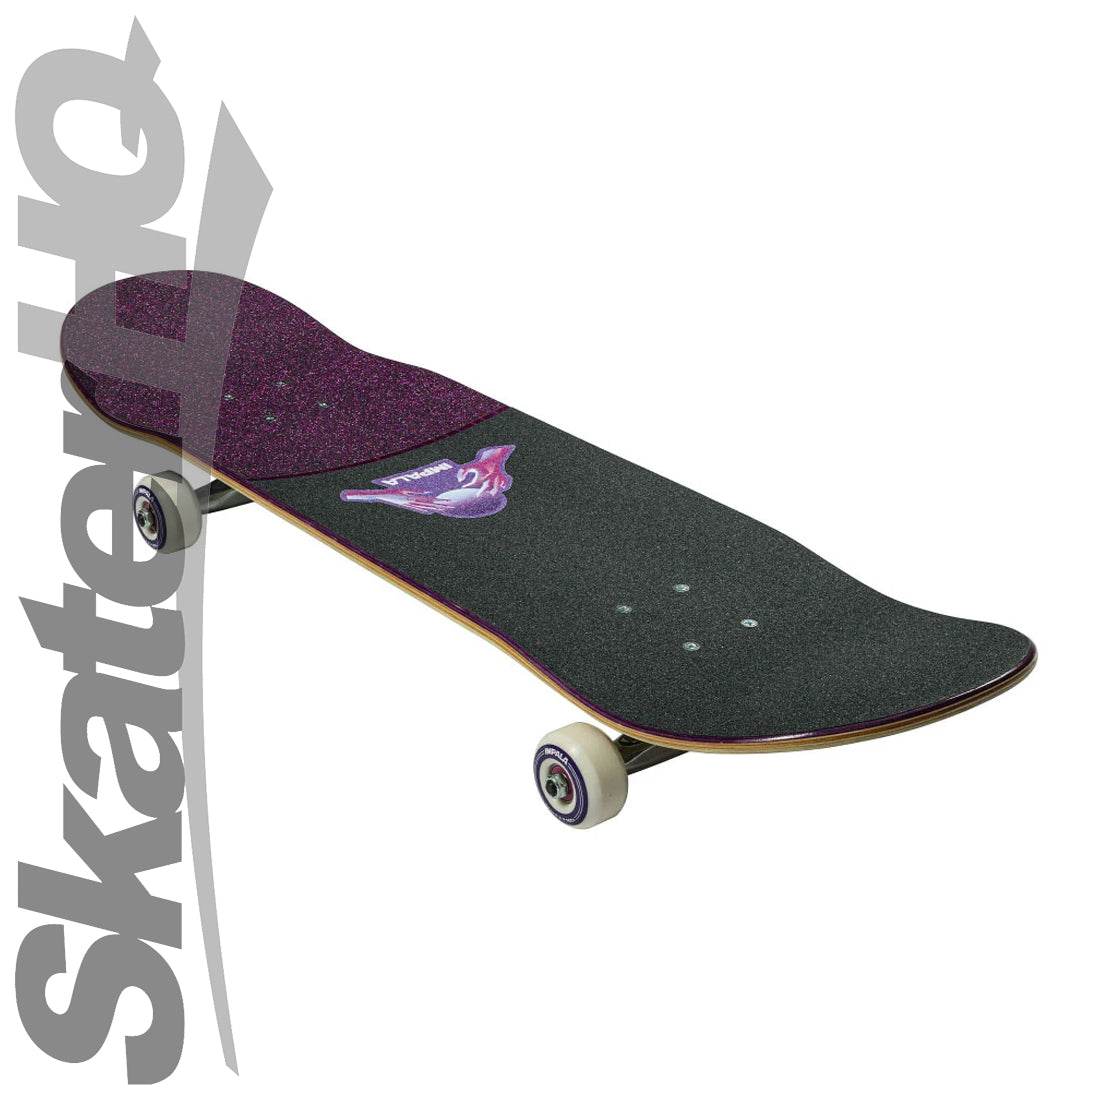 Impala Mystic Pea The Feary 8.0 Complete - Holographic Skateboard Completes Modern Street